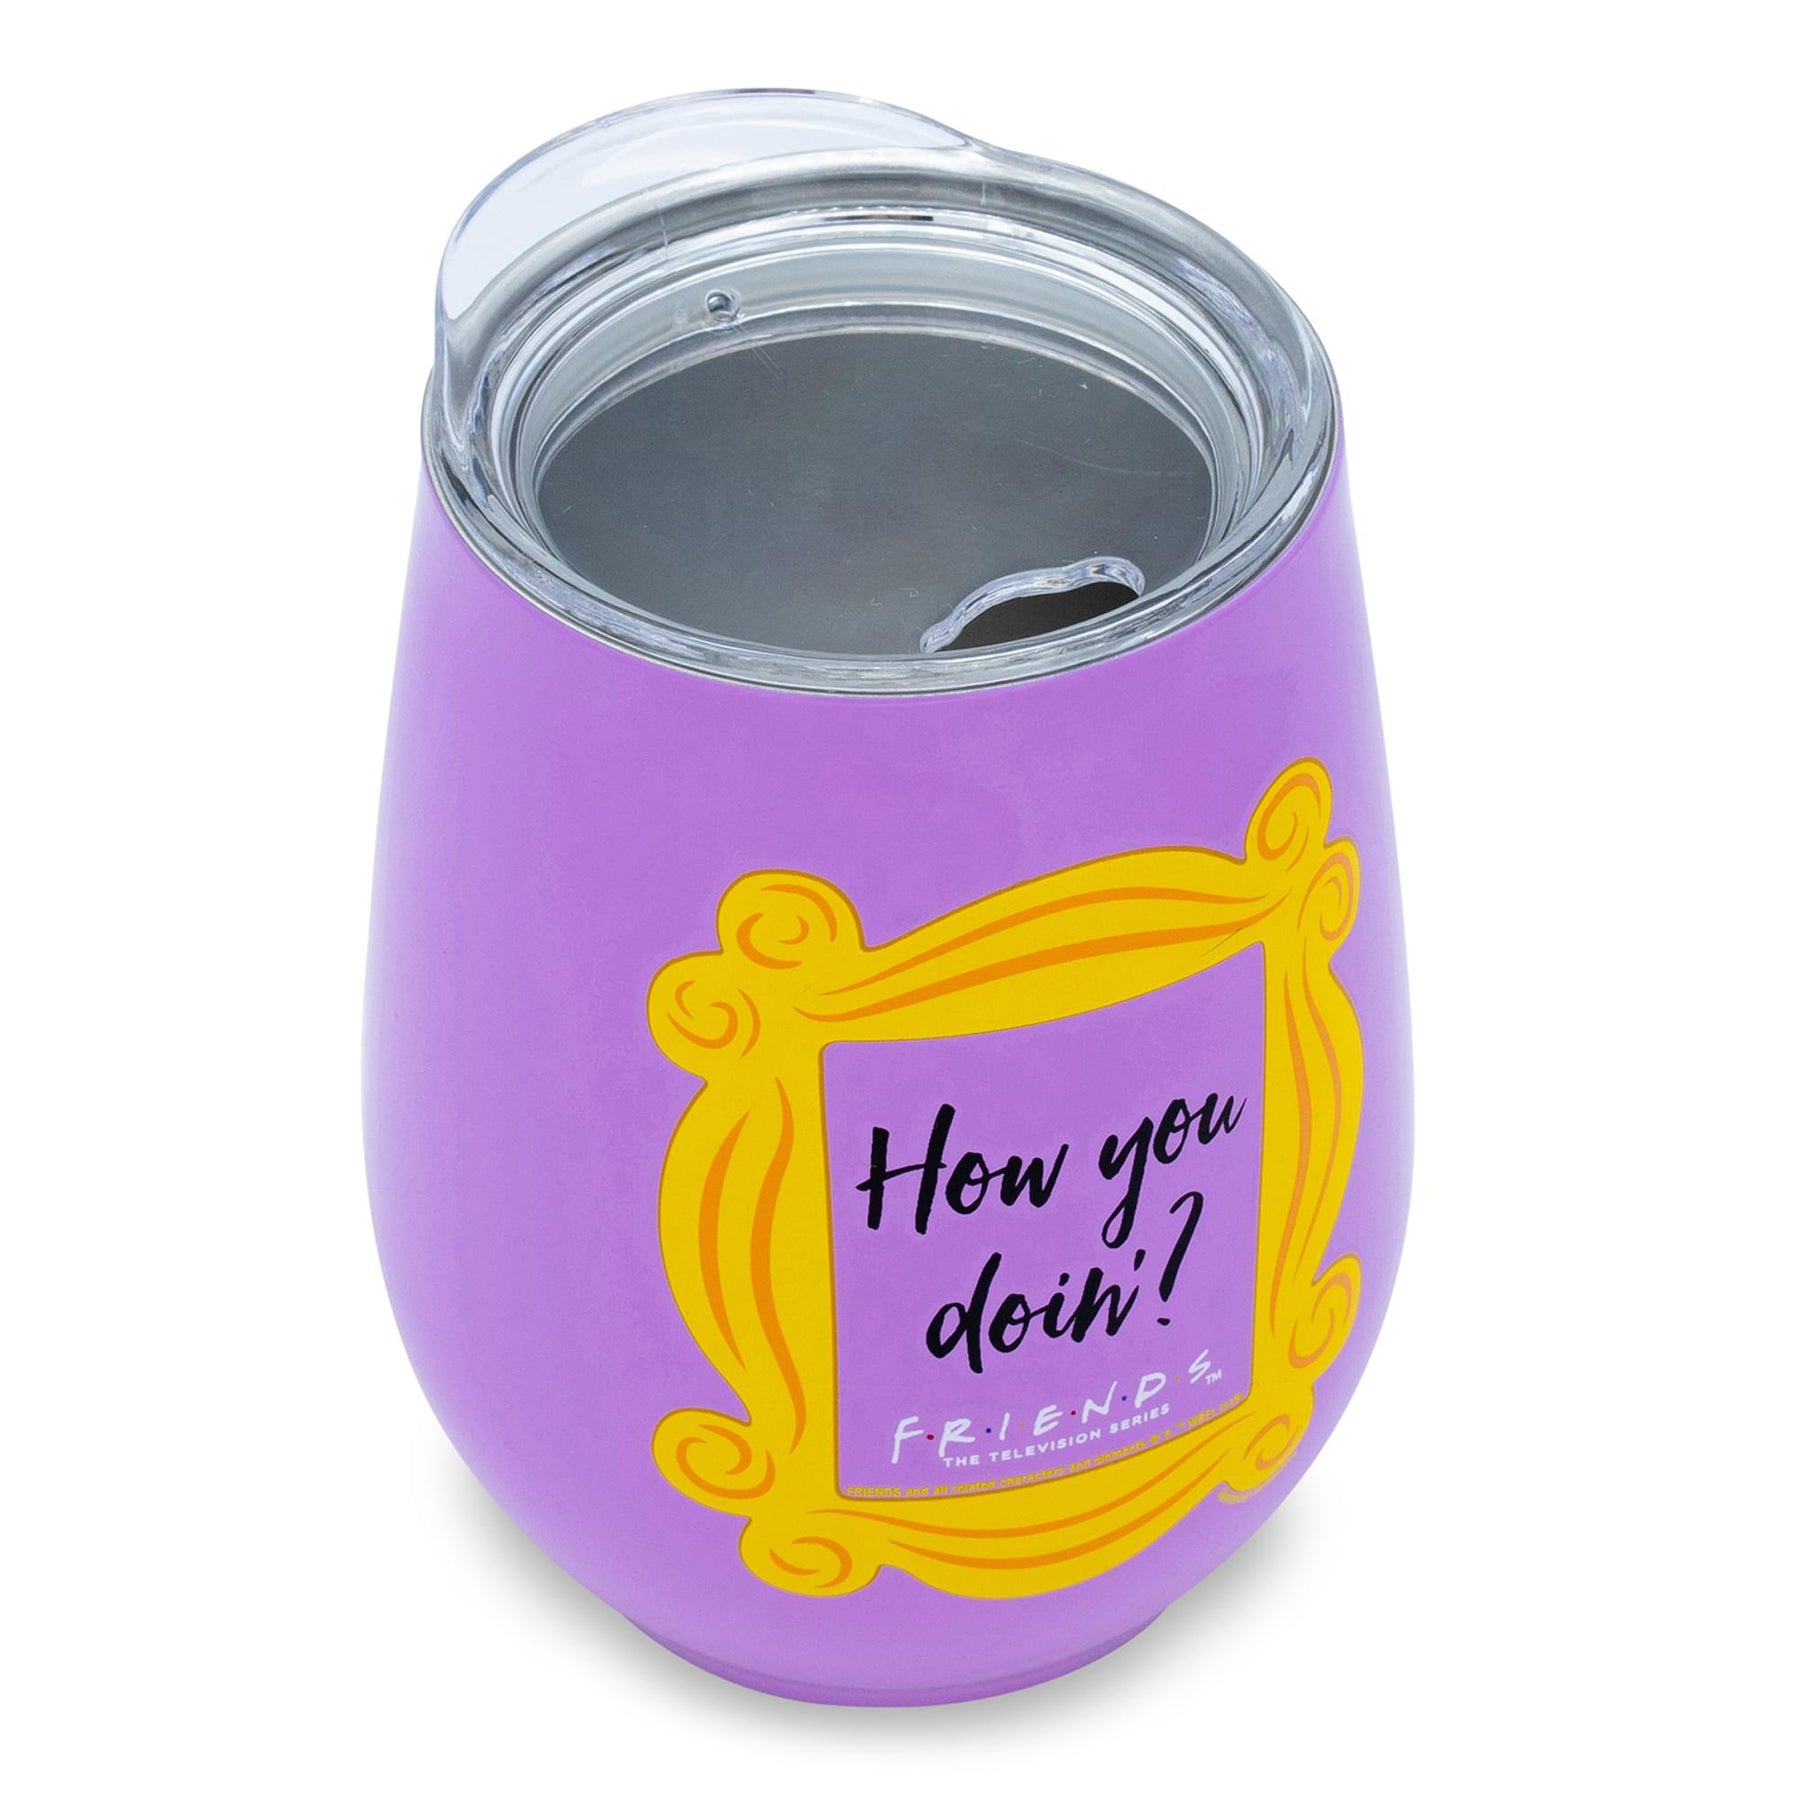 Friends "How You Doin?" Double-Walled Stainless Steel Tumbler | Holds 10 Ounces